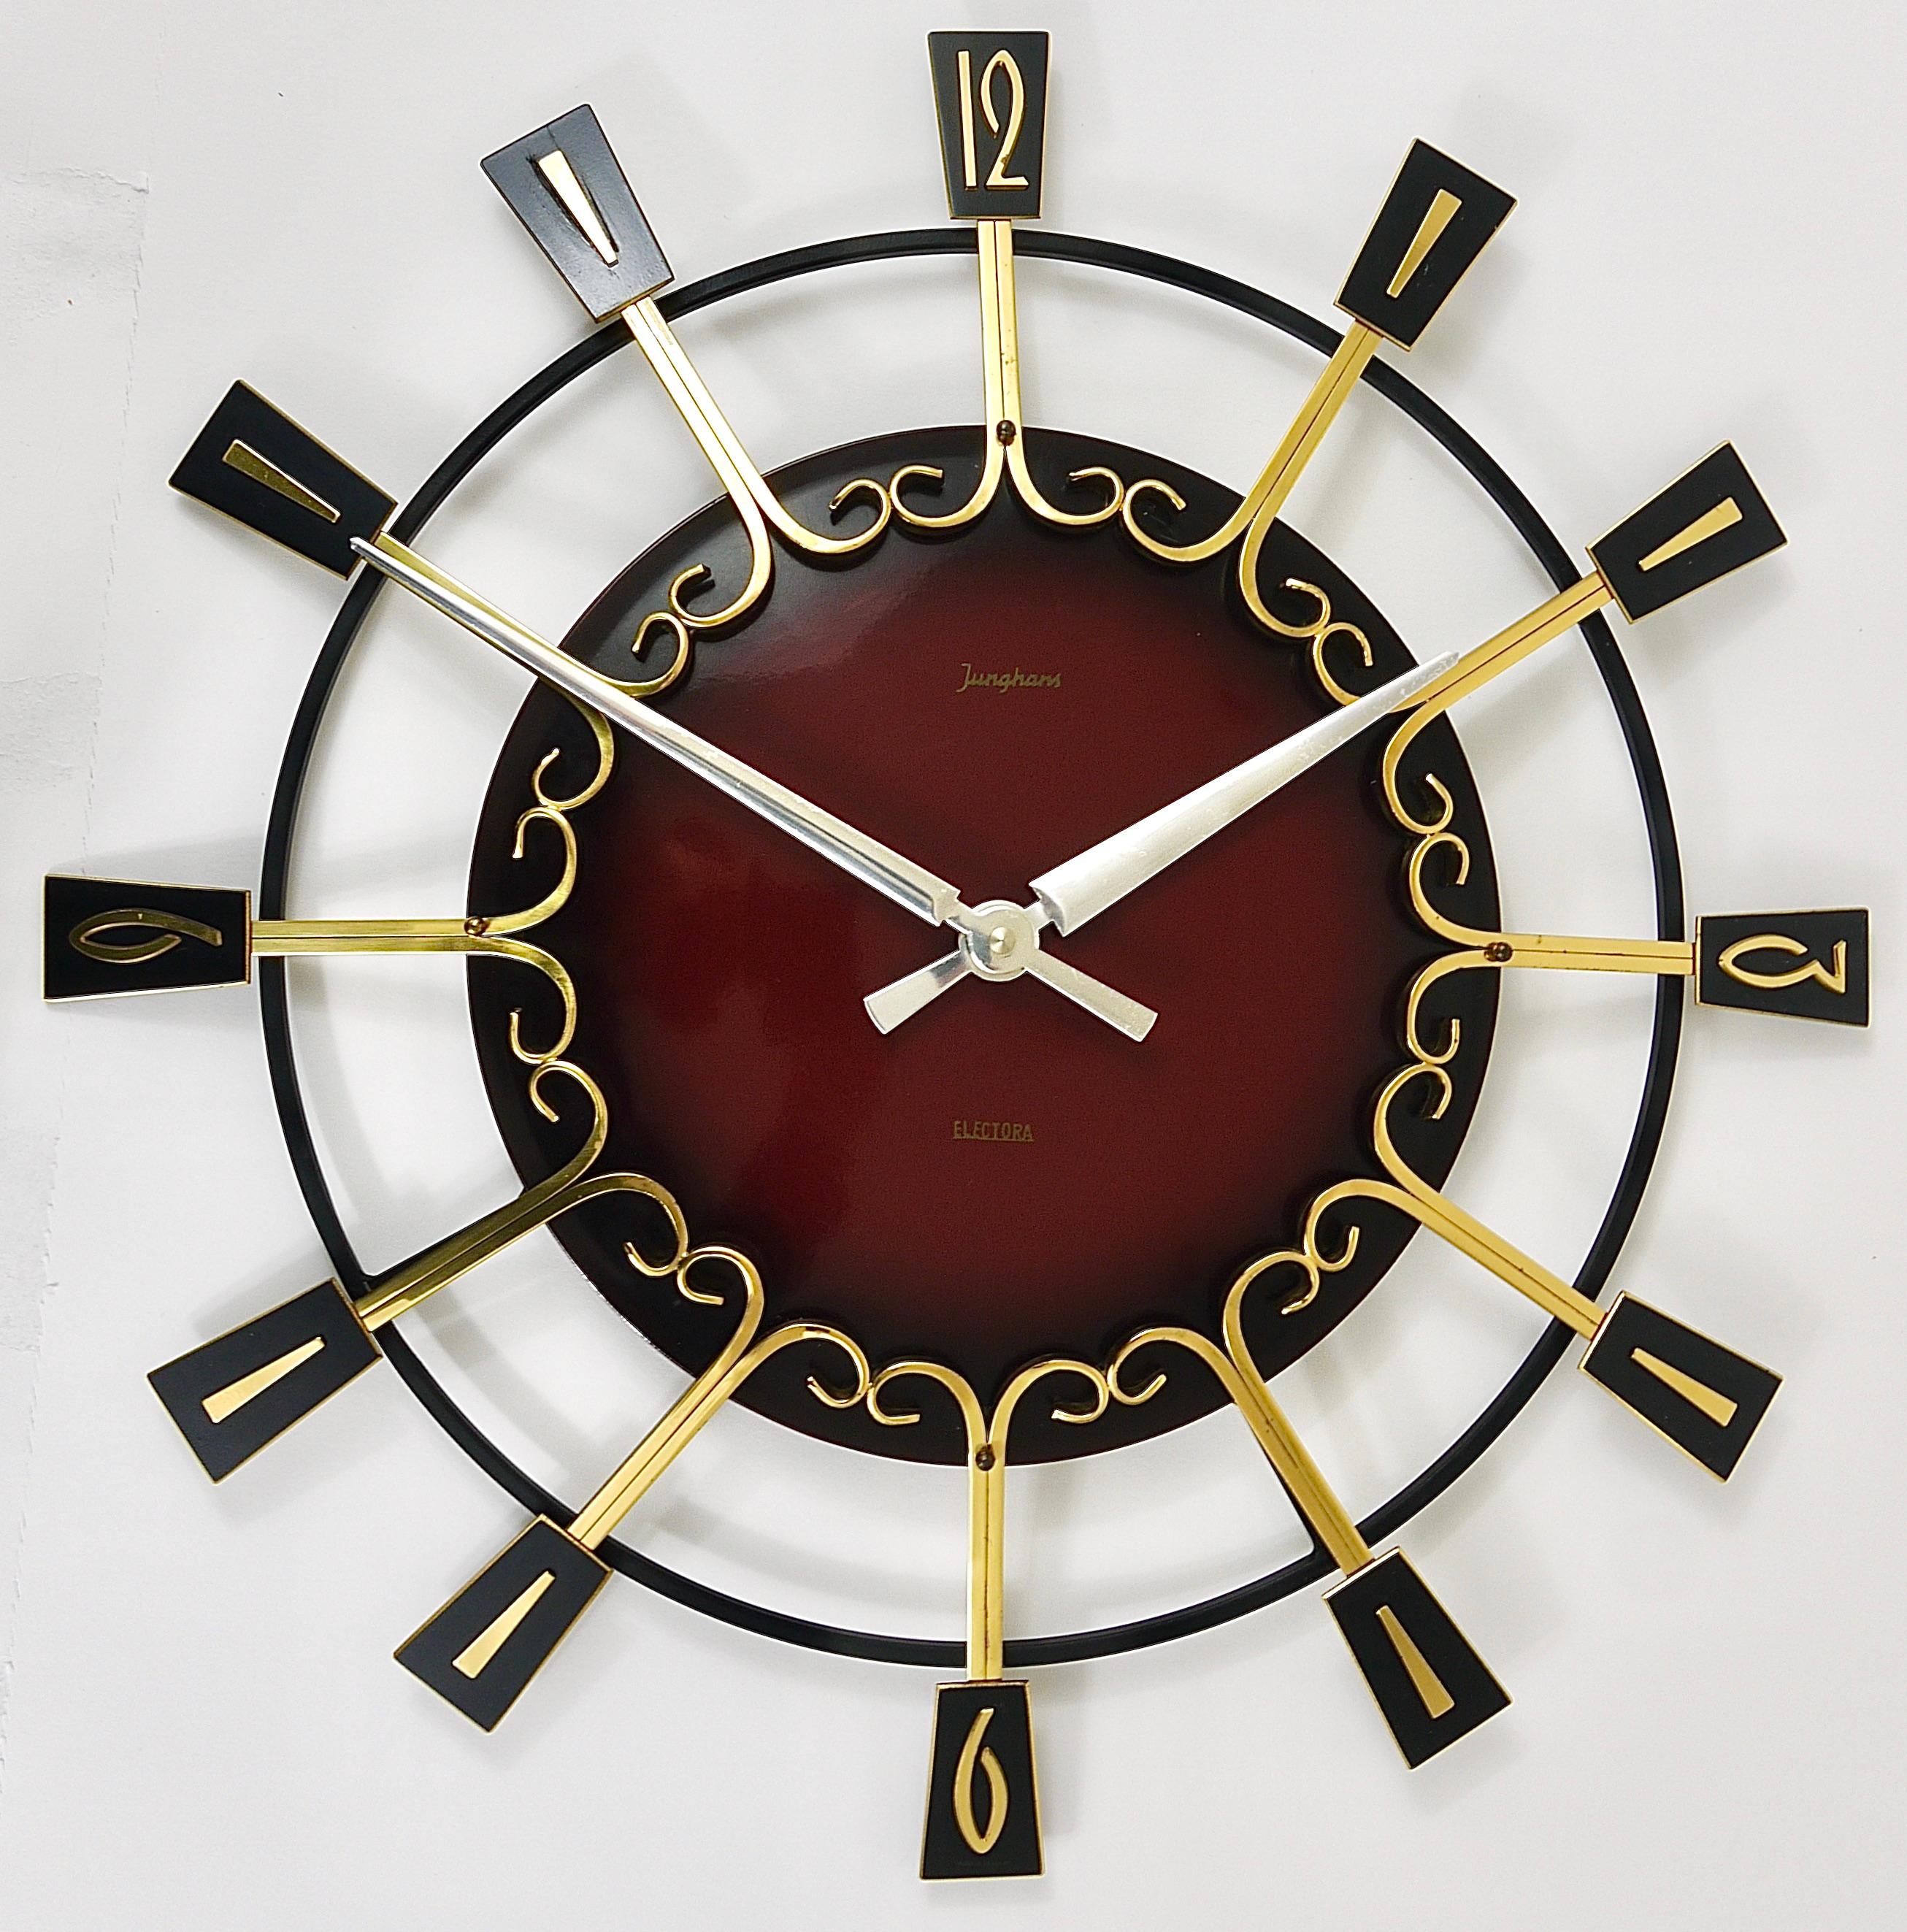 An impressive round Modernist Starburst Brutalism wall clock from the 1950s, executed by Junghans Germany. This clock has a diameter of 17.5 inches, its frame is made of polished brass and black-finished metal. It has a beautiful domed enameled